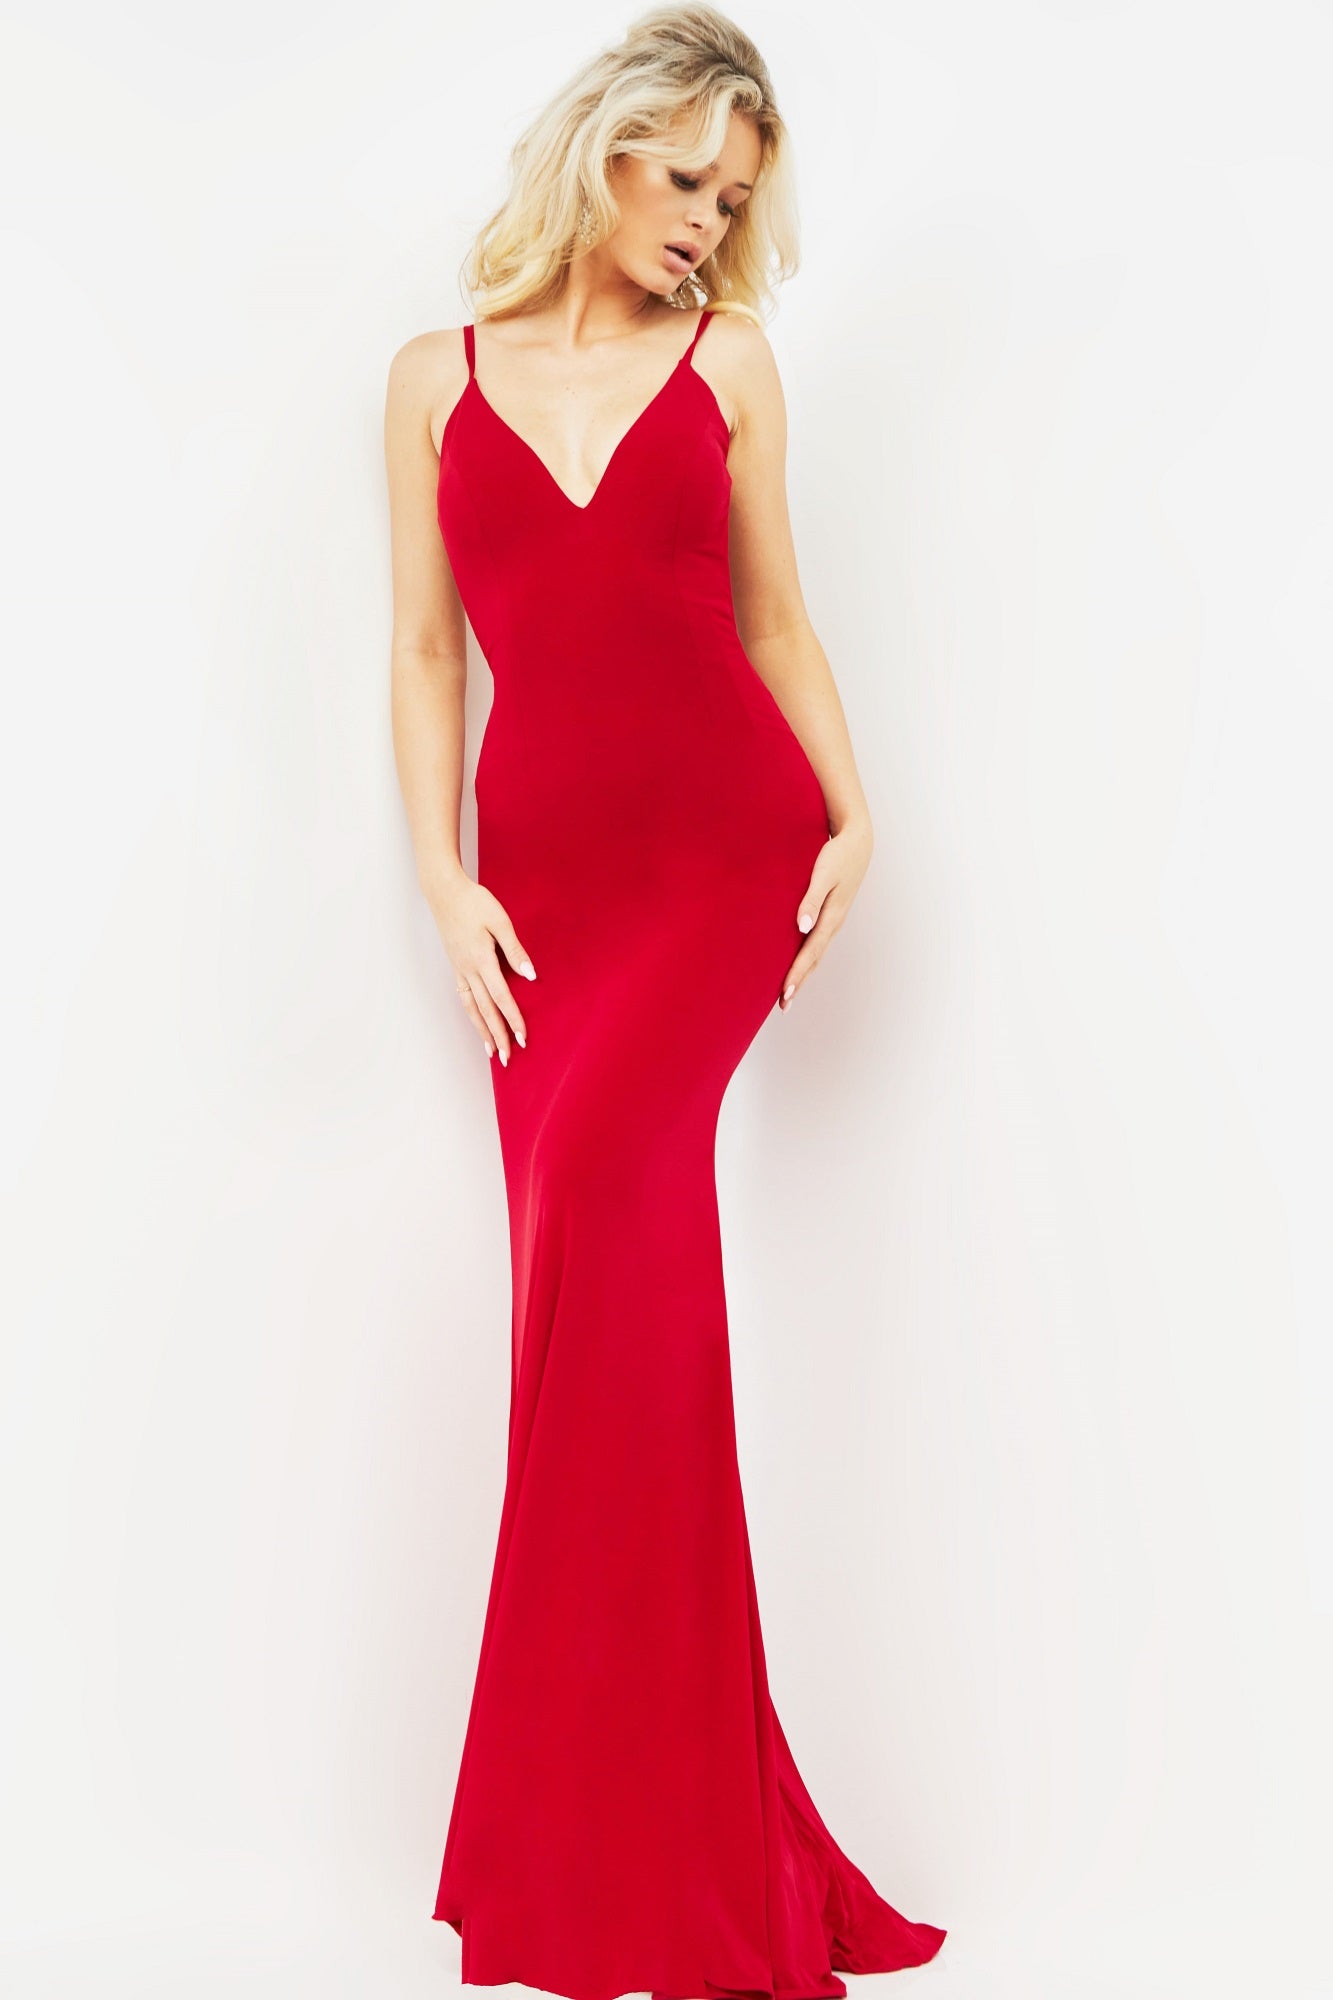 Jovani 00512 plunging v neckline fitted mermaid prom dress evening gown pageant dress has an open back with multiple straps that cross to create a dramatic effect.  Ruching at the lower back to give a little extra lushness and a small sweeping train. 